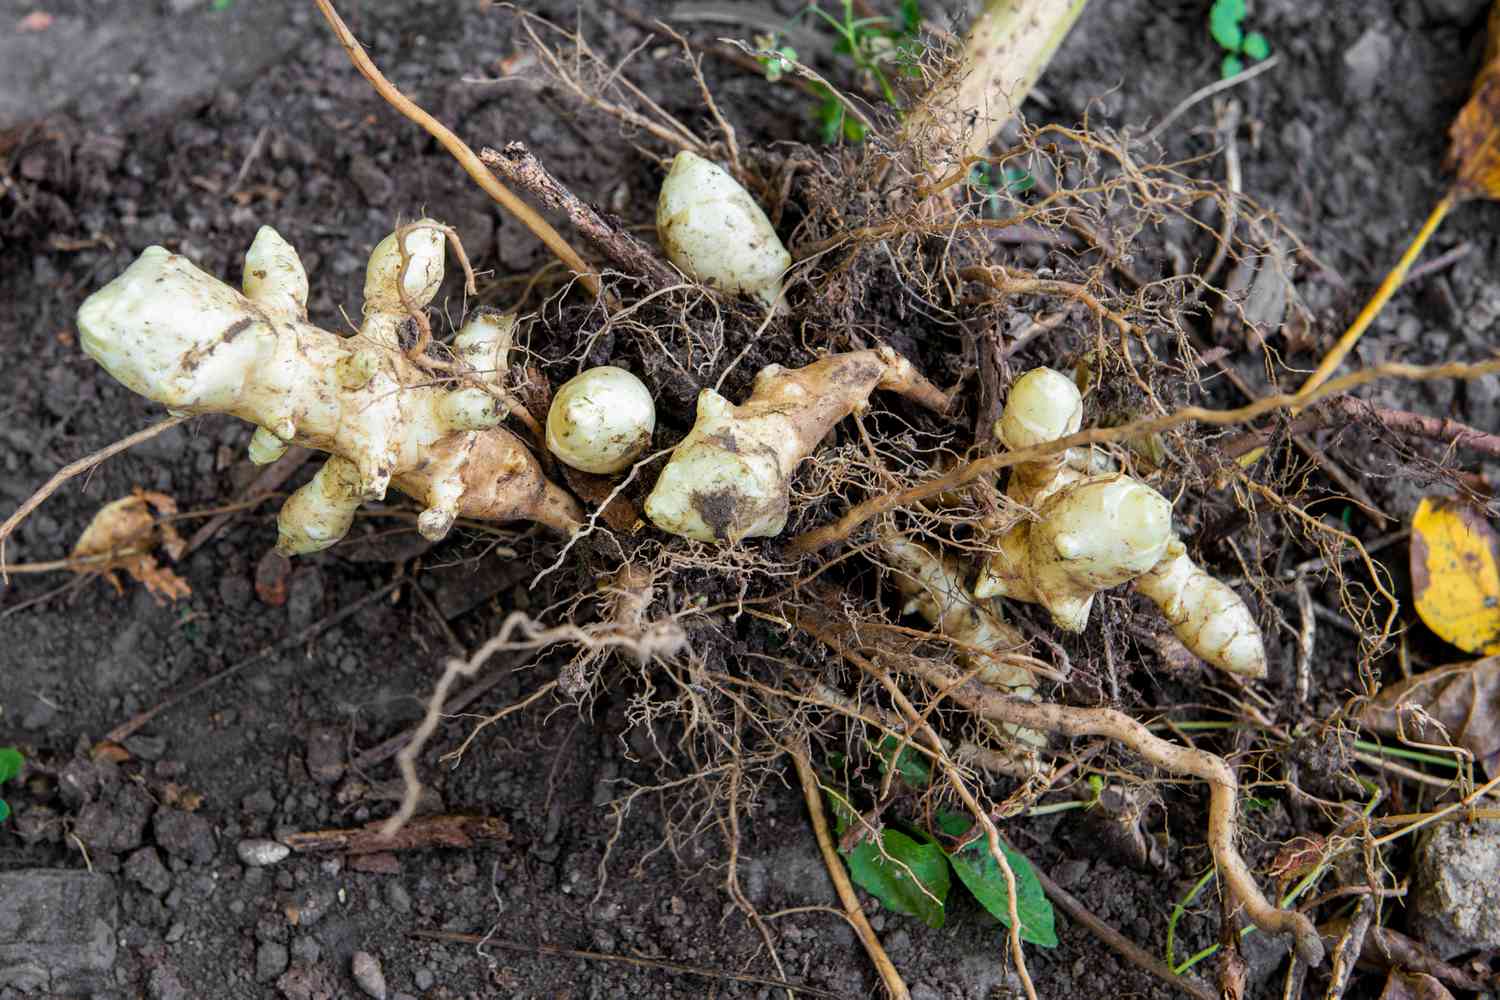 Jerusalem artichokes pulled from ground and resting on soil with roots exposed